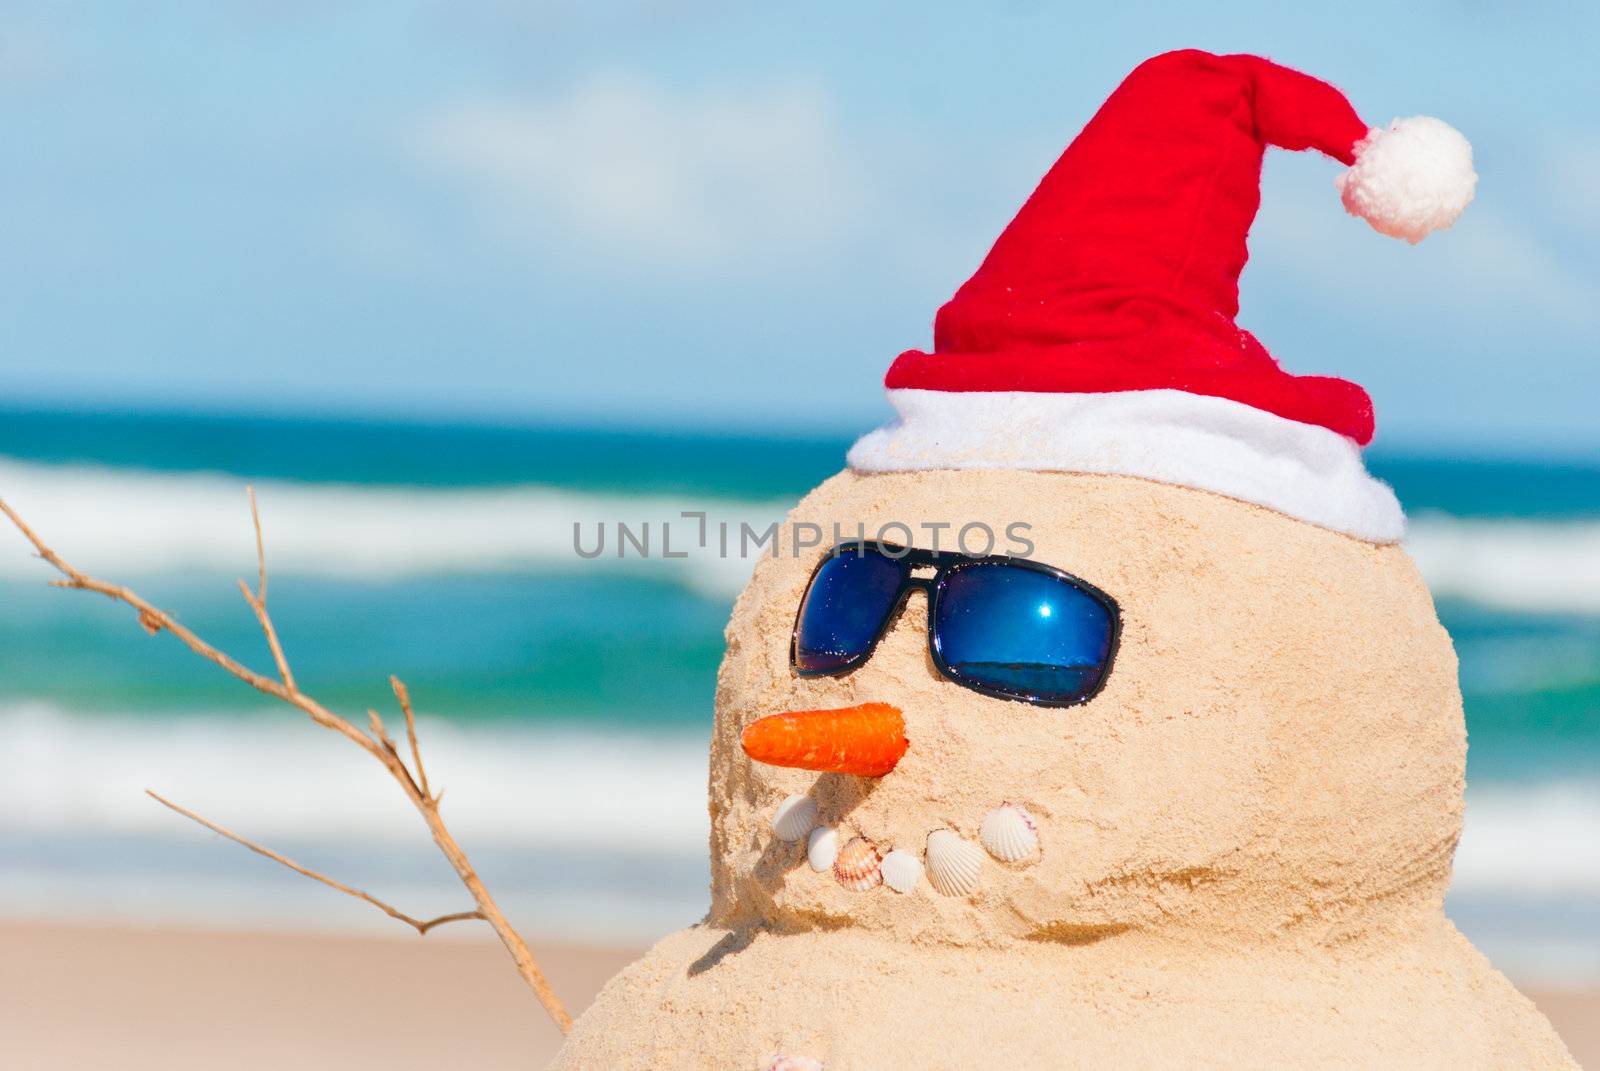 Happy snowman at the beach with sun glasses. His right arm is visible as well